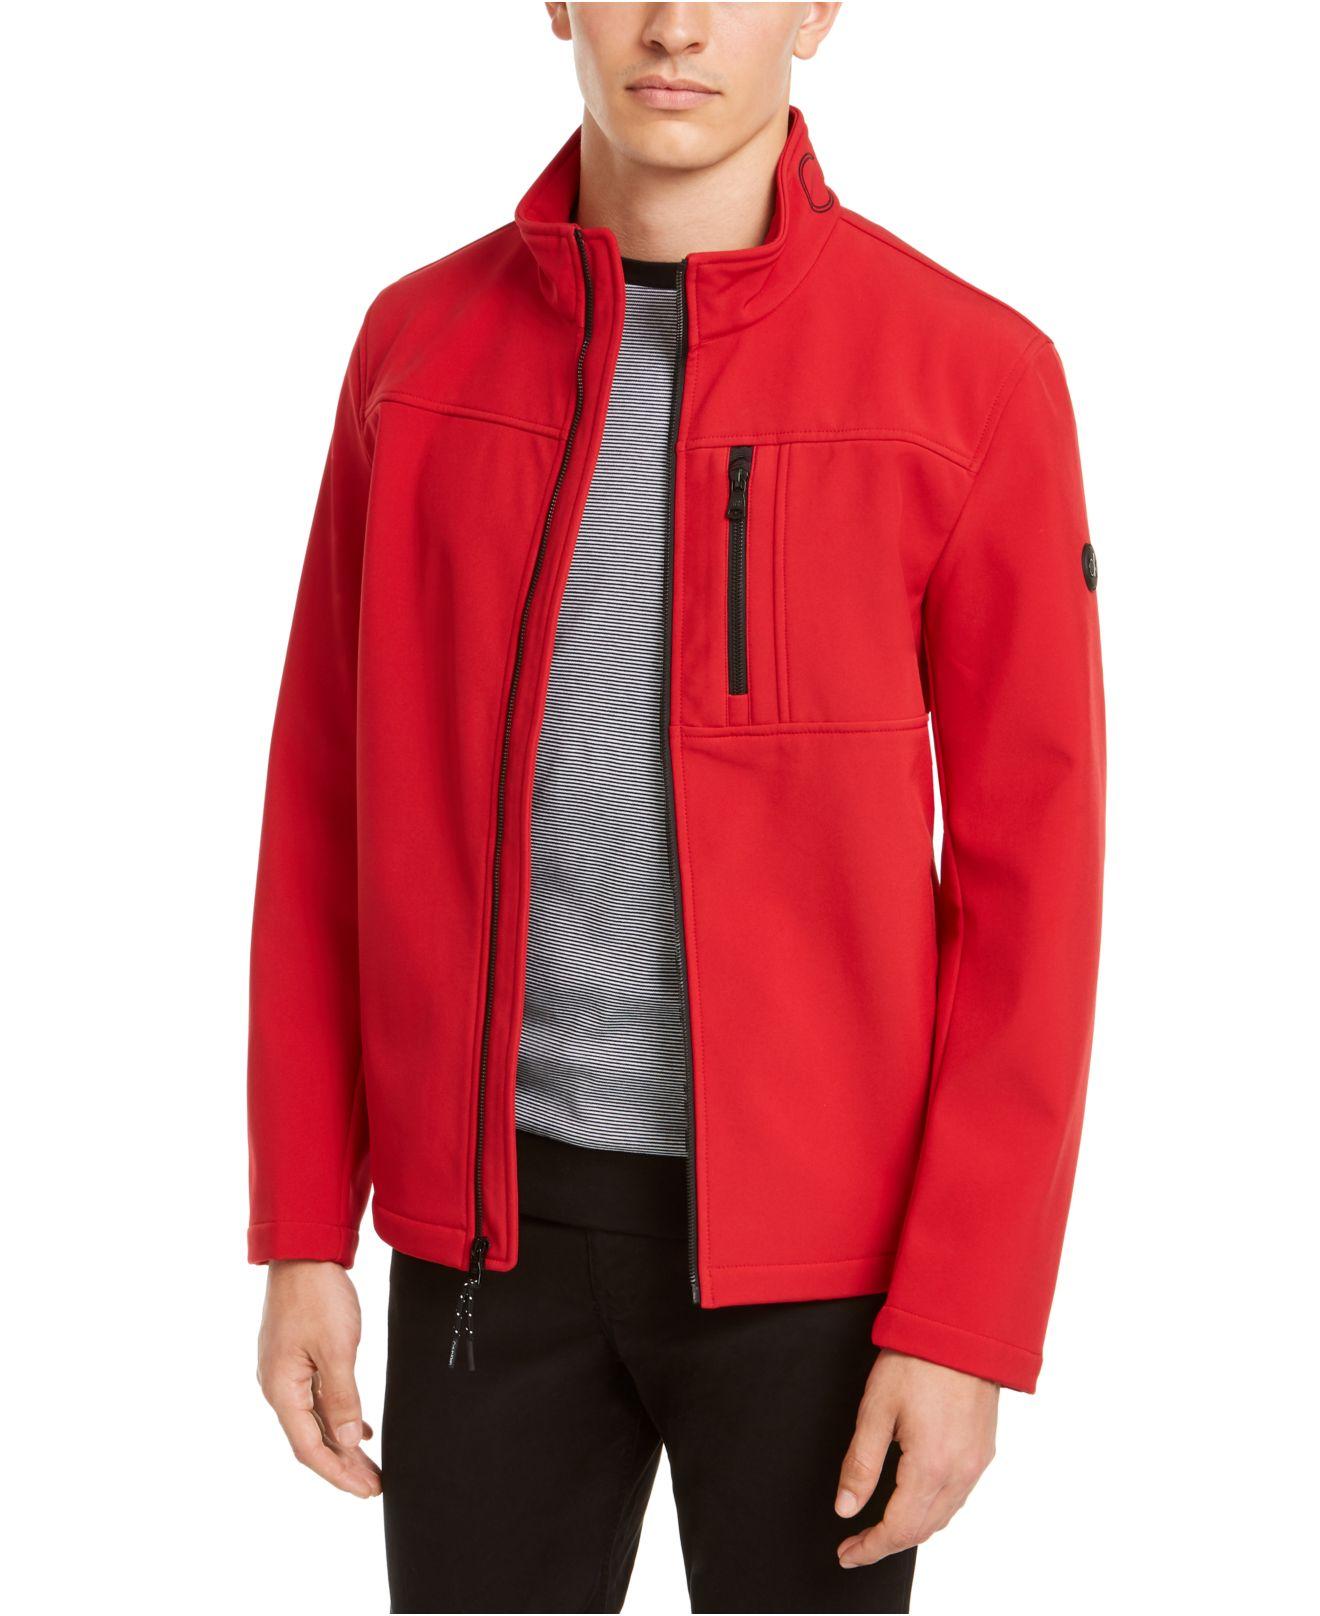 Calvin Klein Synthetic Soft Shell Open Bottom Jacket in Deep Red (Red